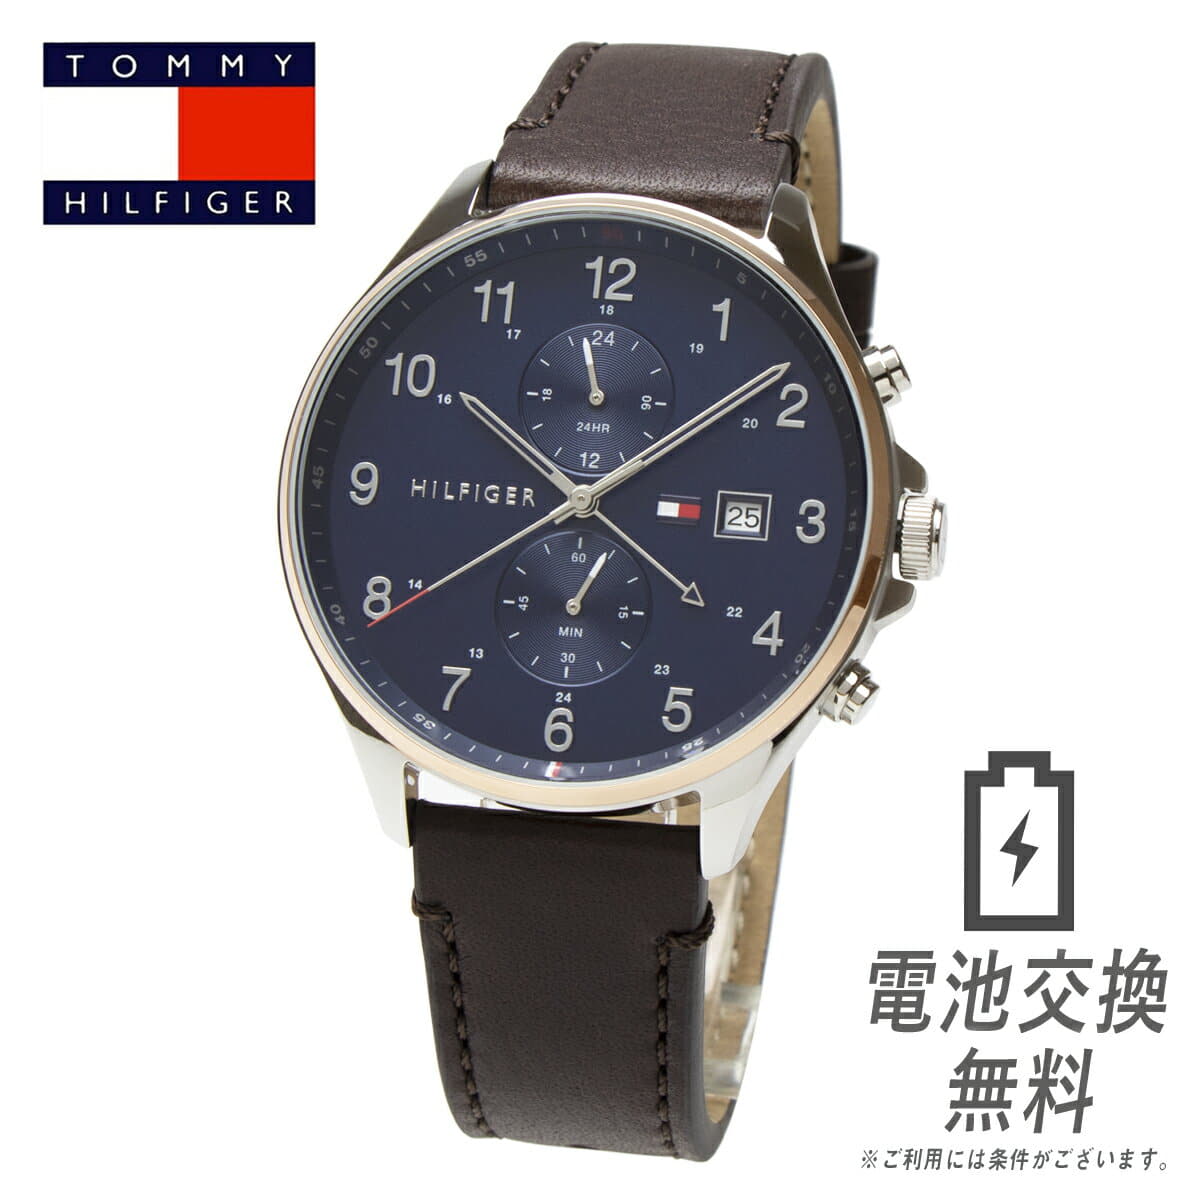 New]! Battery exchange ! It is Mens size analog brown leather belt clock use for the tomihirufiga tommy hilfiger mens dual time GMT 1791712 calendar Navy Rose waterproofing - BE FORWARD Store